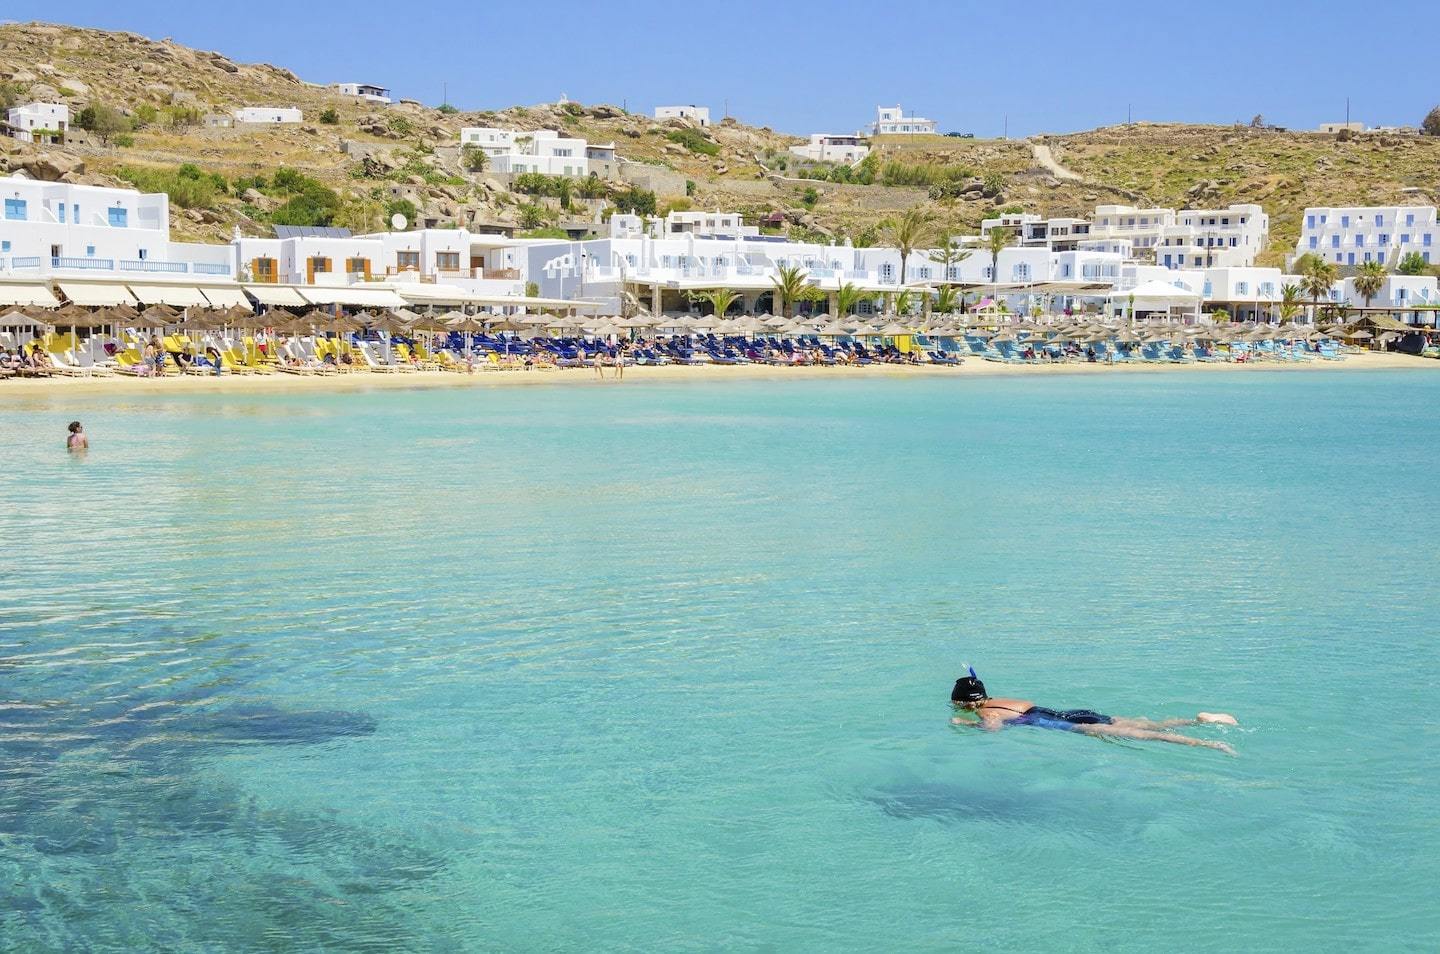 Person snorkeling in clear water with town behind them at Platis Gialos in Mykonos, Greece